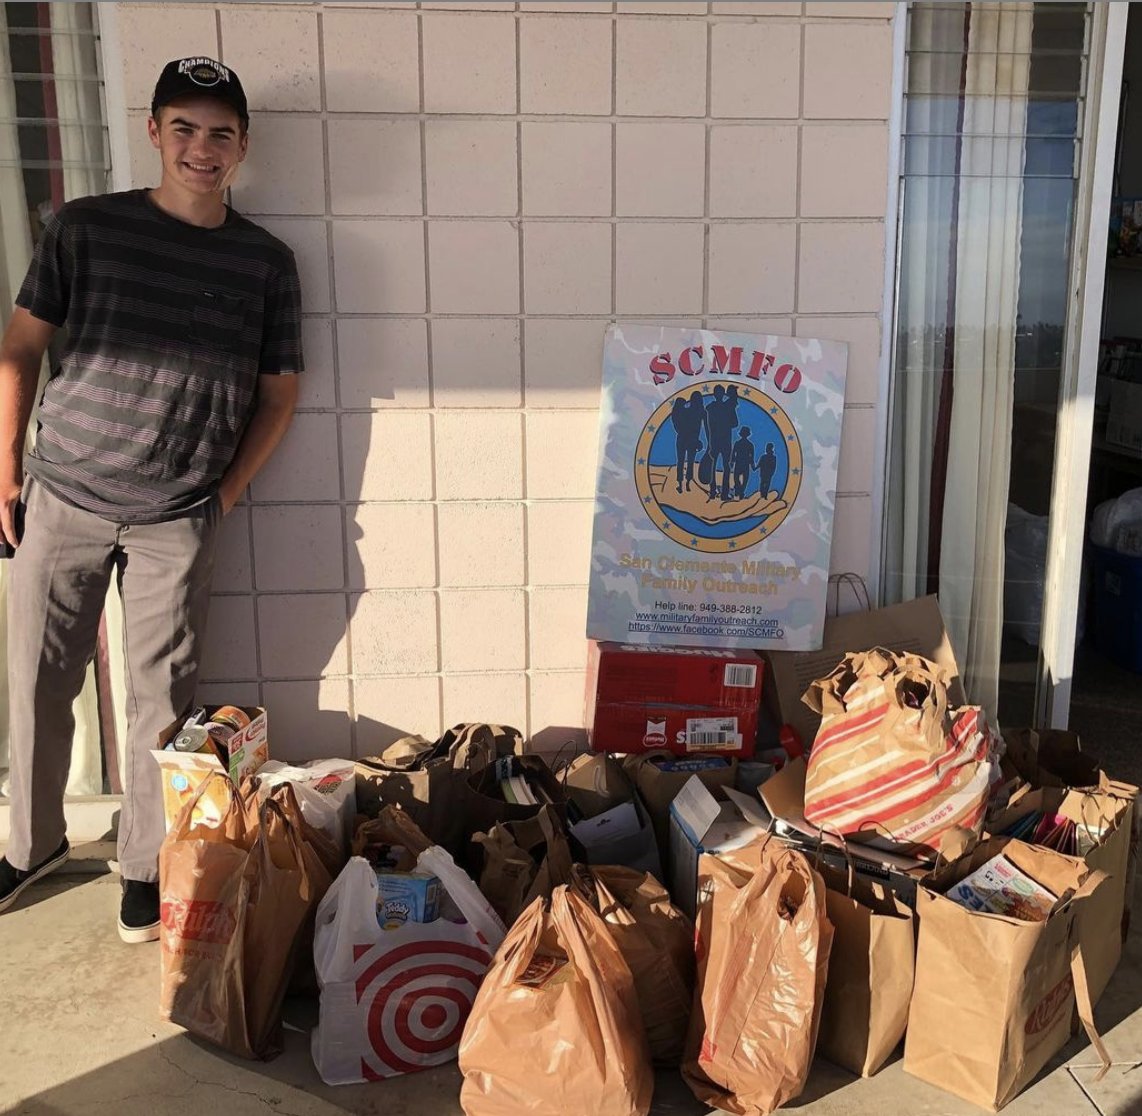 Cooper A., an individual member of the San Clemente, CA, chapter ran a food and school supply drive for the 5th straight year. All of the donations help local #CampPendleton military families. How amazing! #givingback #teenvolunteering #wegotthis #teenvolunteers